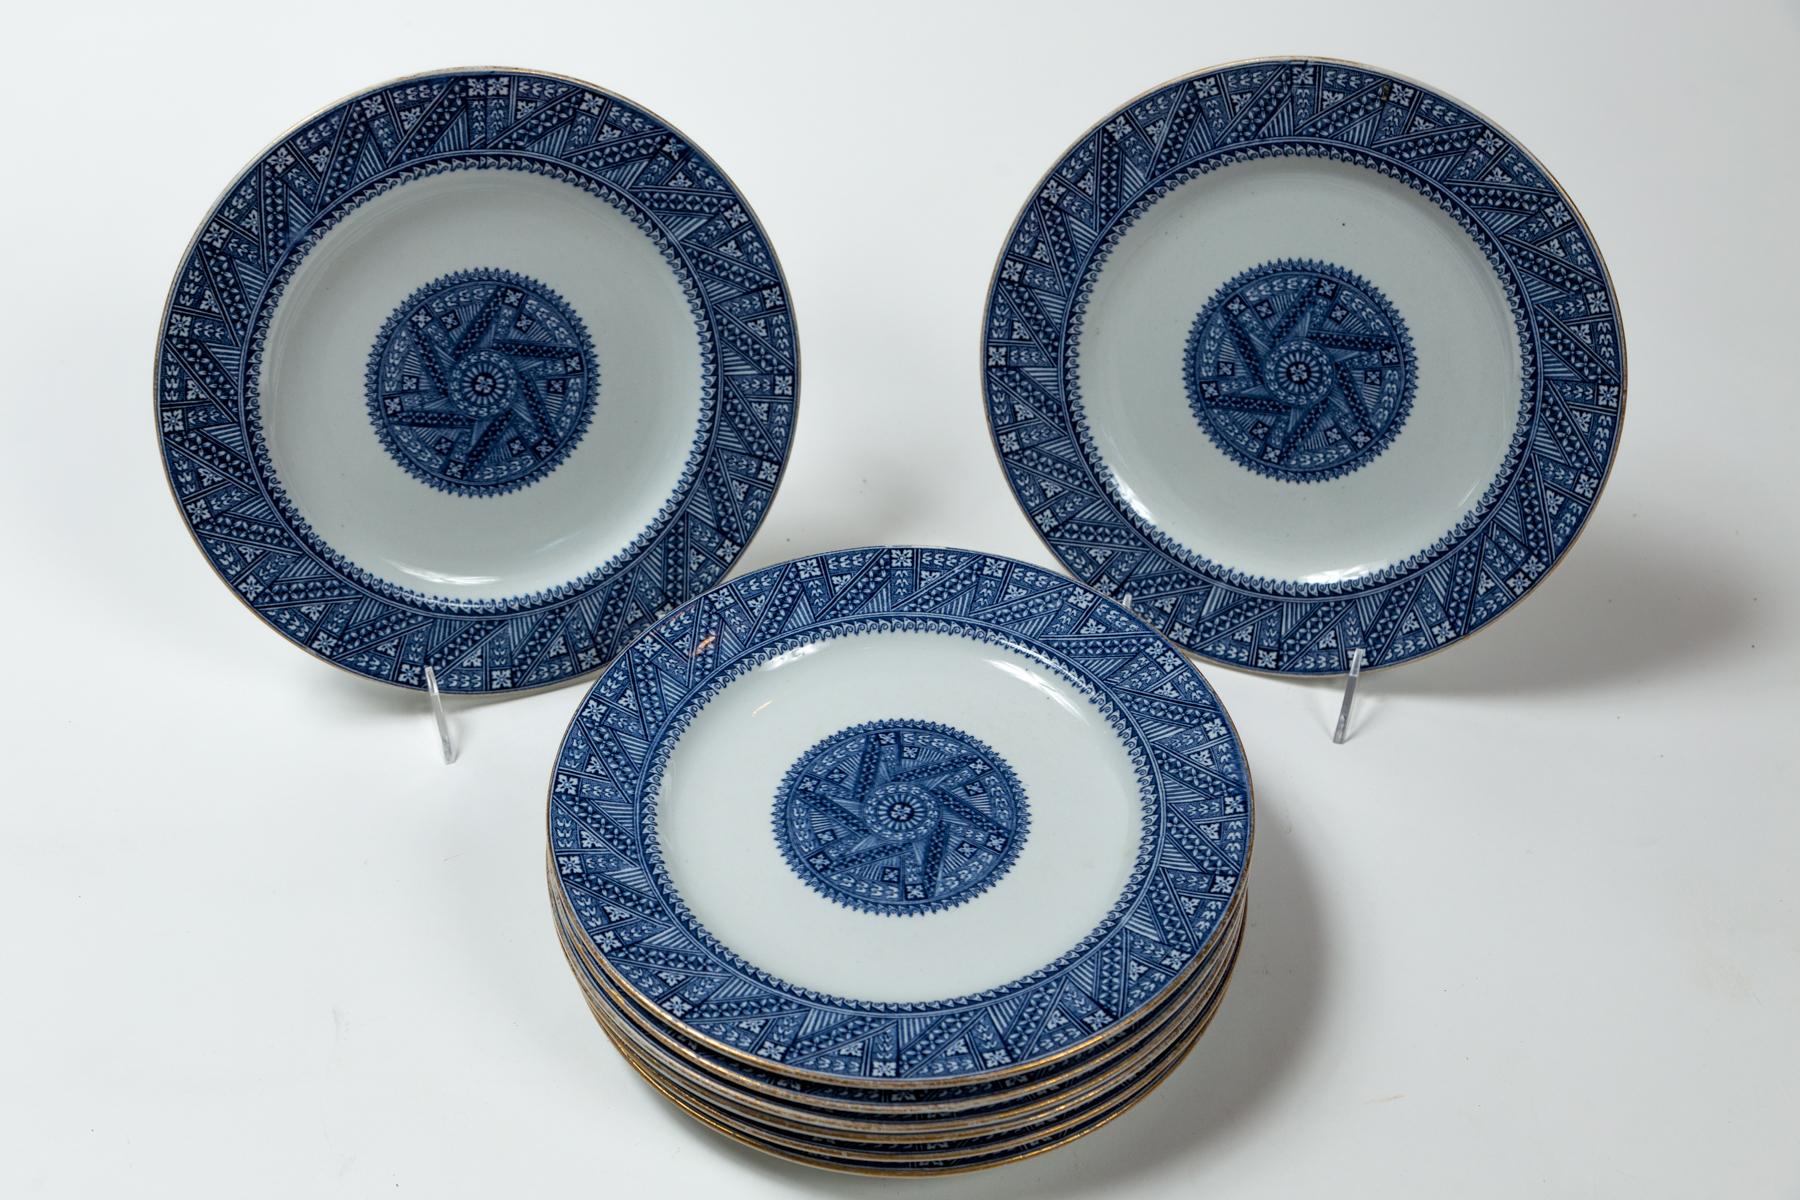 Aesthetic Movement Set of 8 Royal Worcester Aesthetic Period Plates, 19th Century, England For Sale